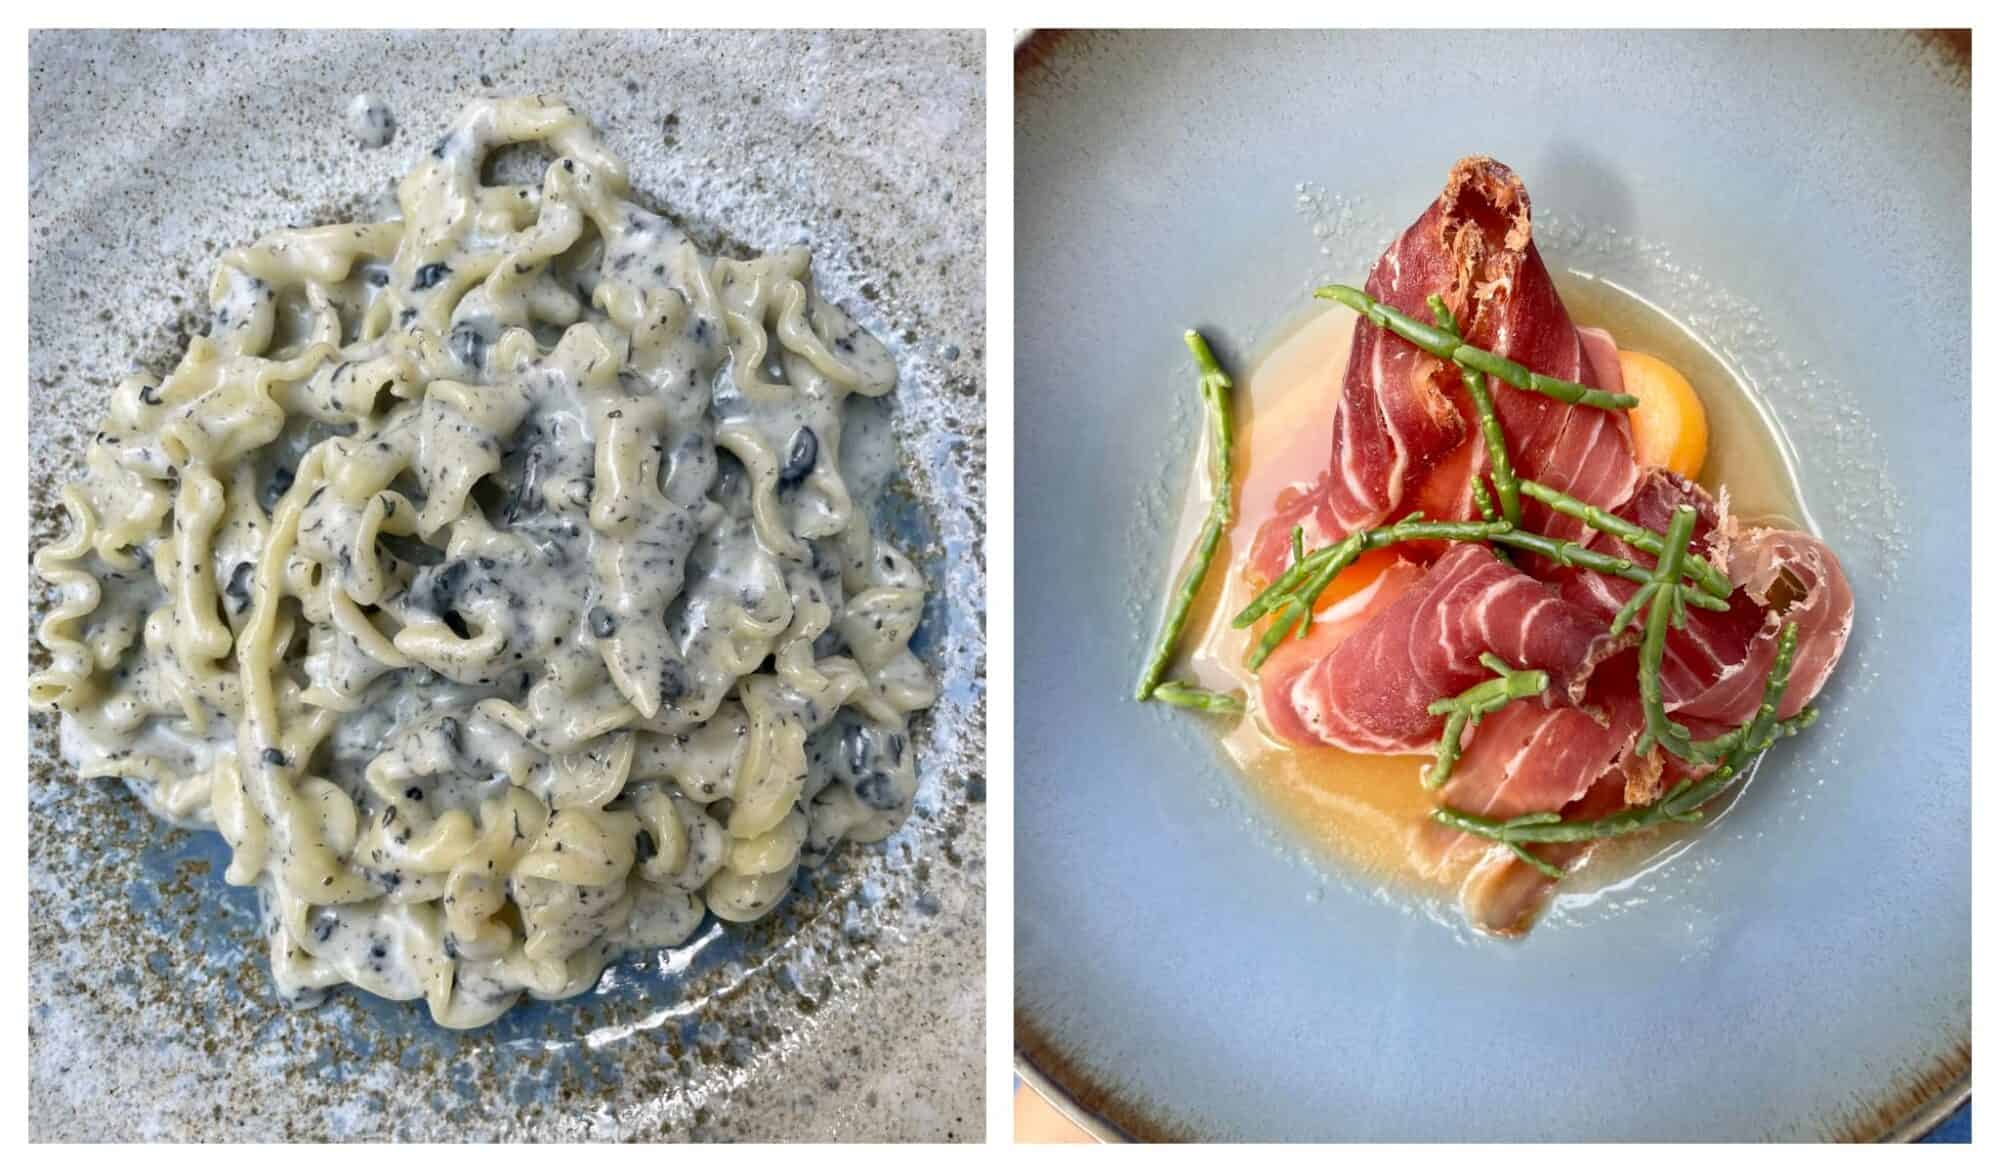 left: a plate of pasta in a gorgonzola cream sauce; right a plate with parma ham and samphire sprinkled on top from Il Cuoco Galante restaurant.